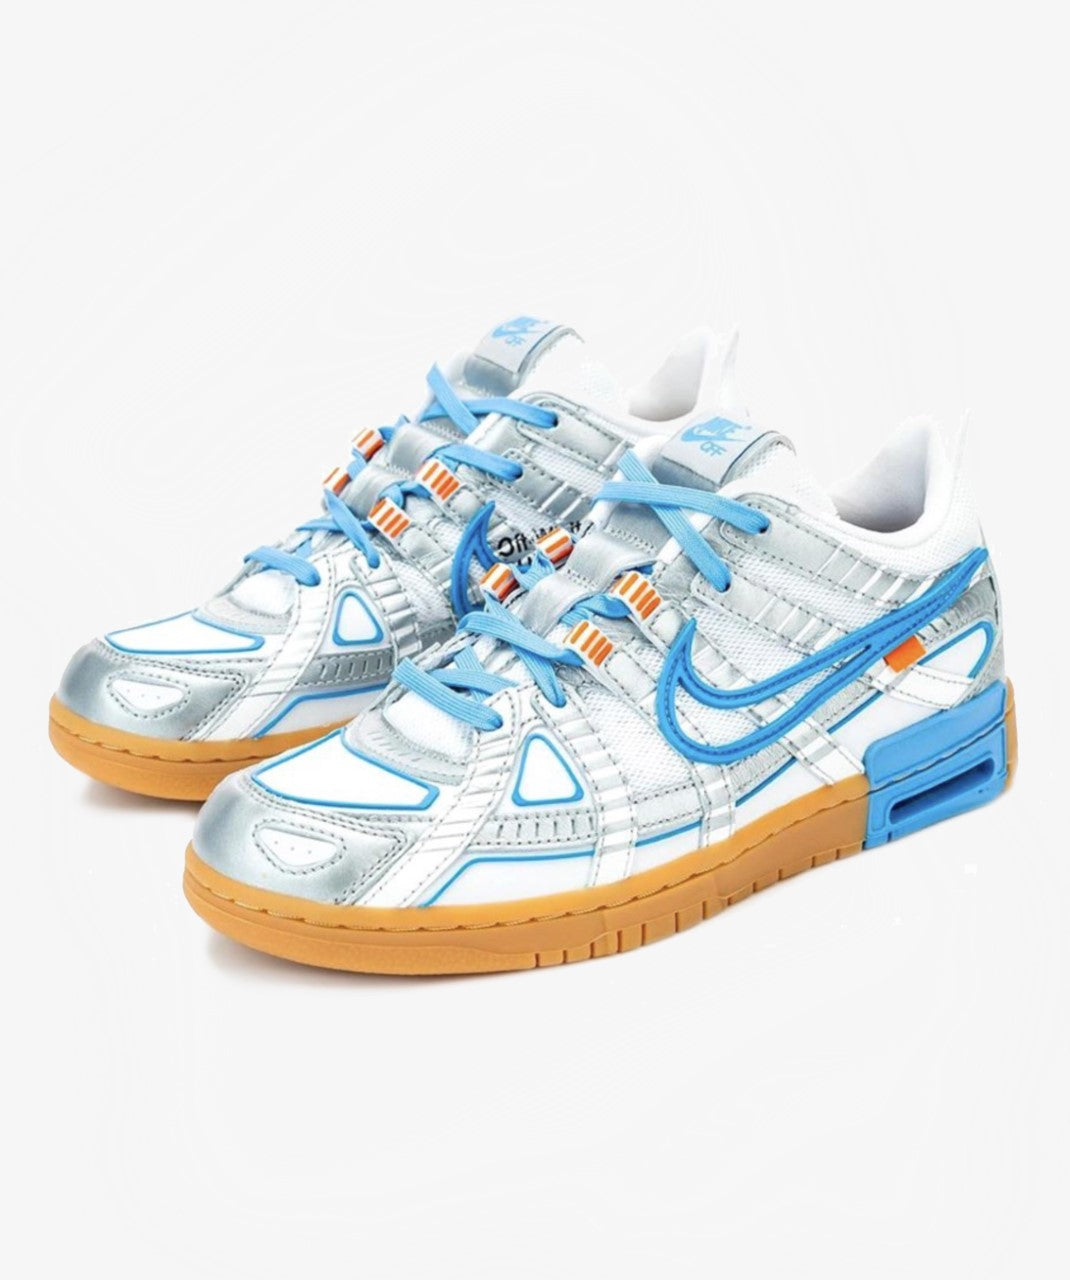 Nike x Off-White Air Rubber Dunk 'University Blue' (PS) – Funky Insole